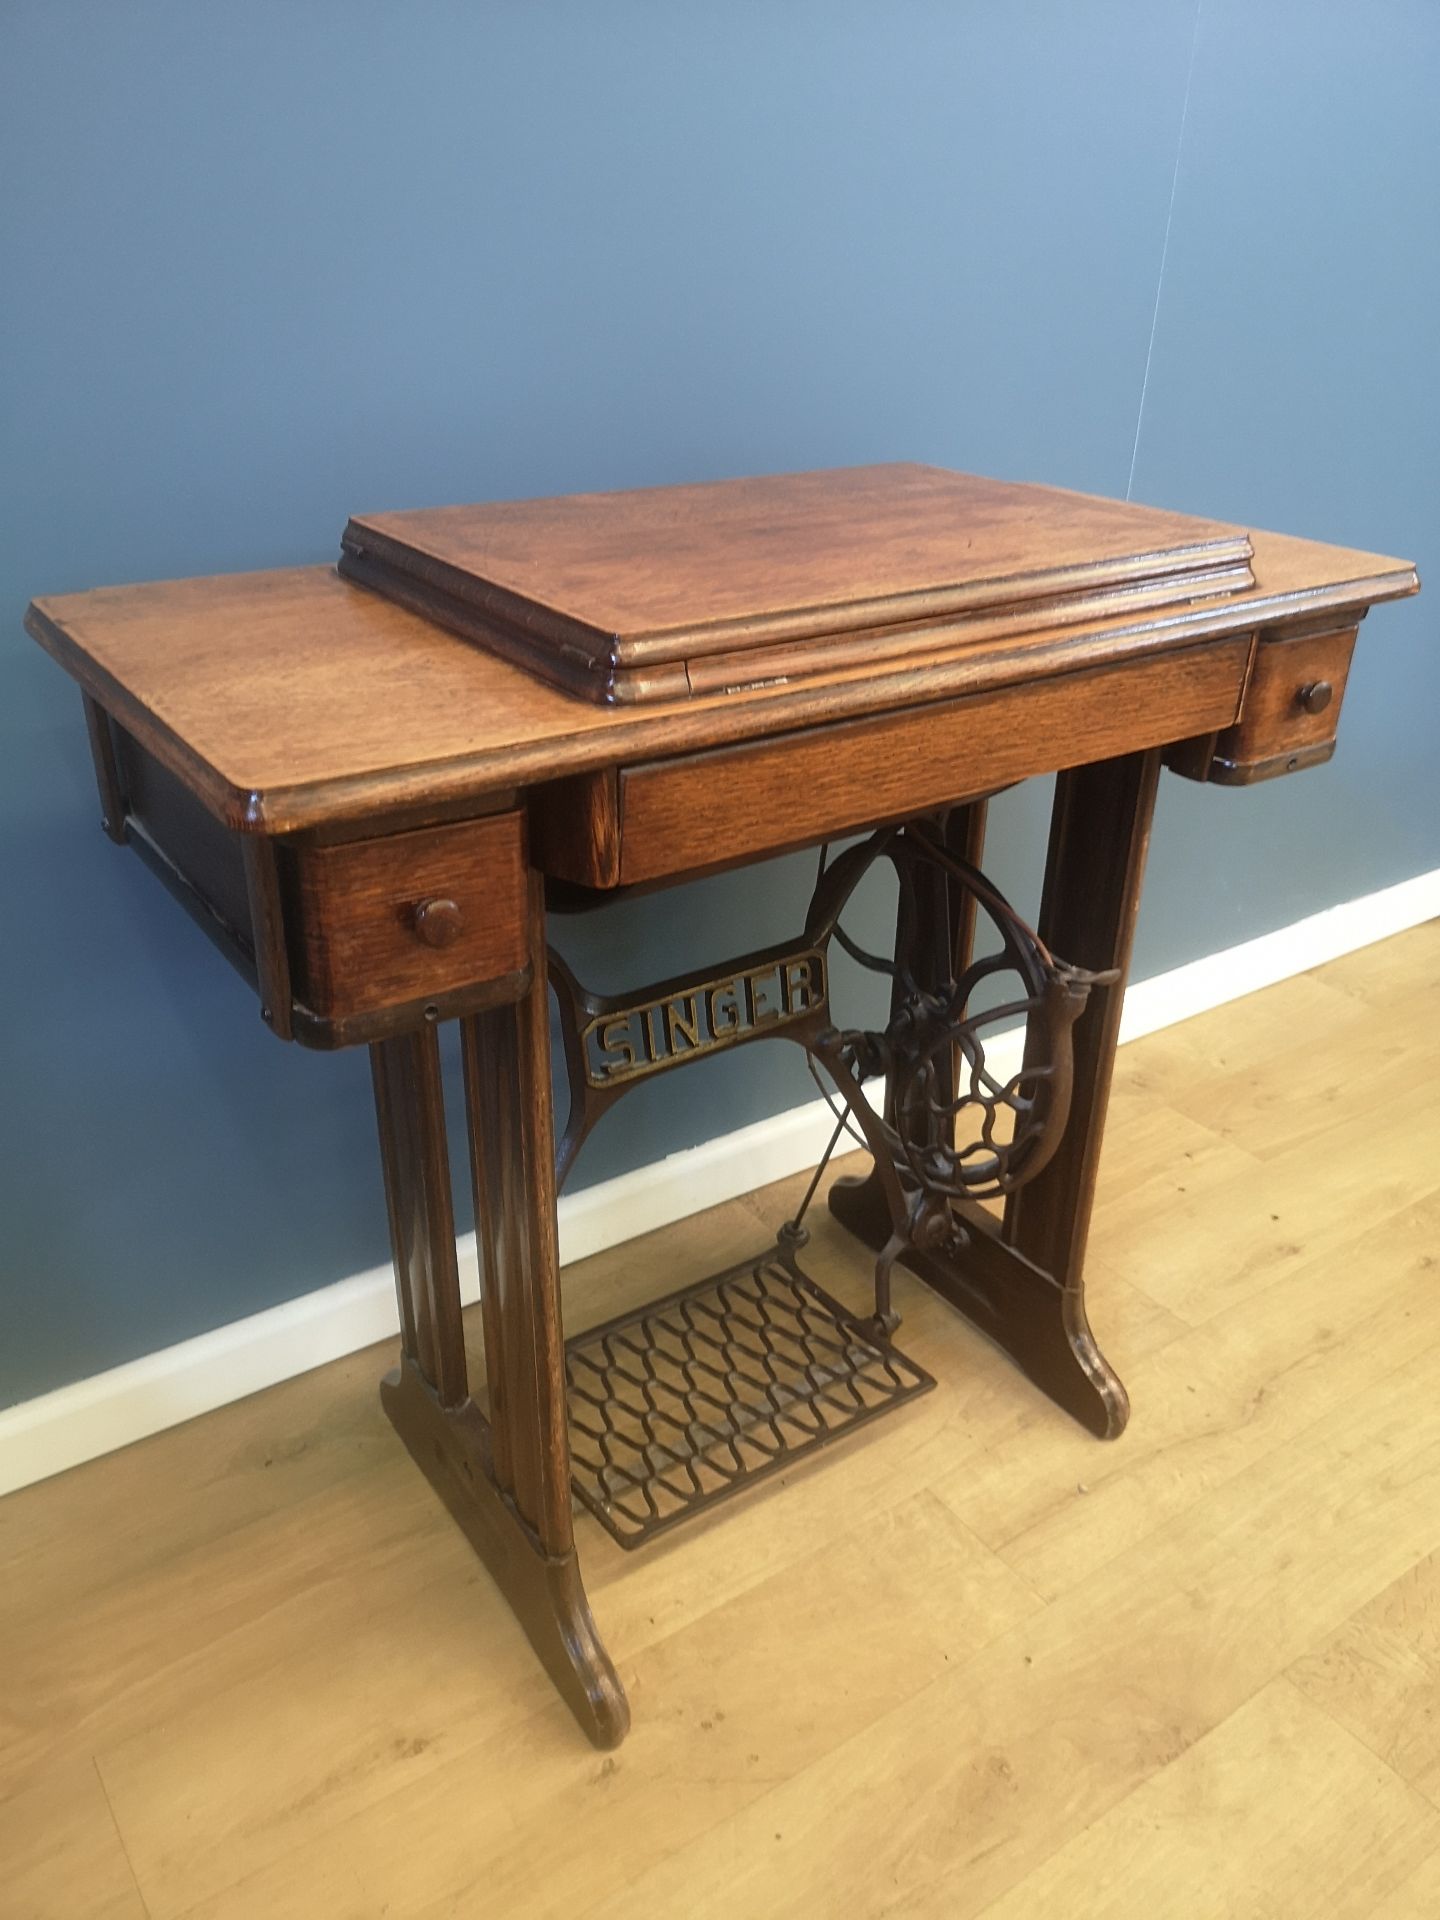 Singer sewing machine set in an oak treadle table - Image 3 of 7